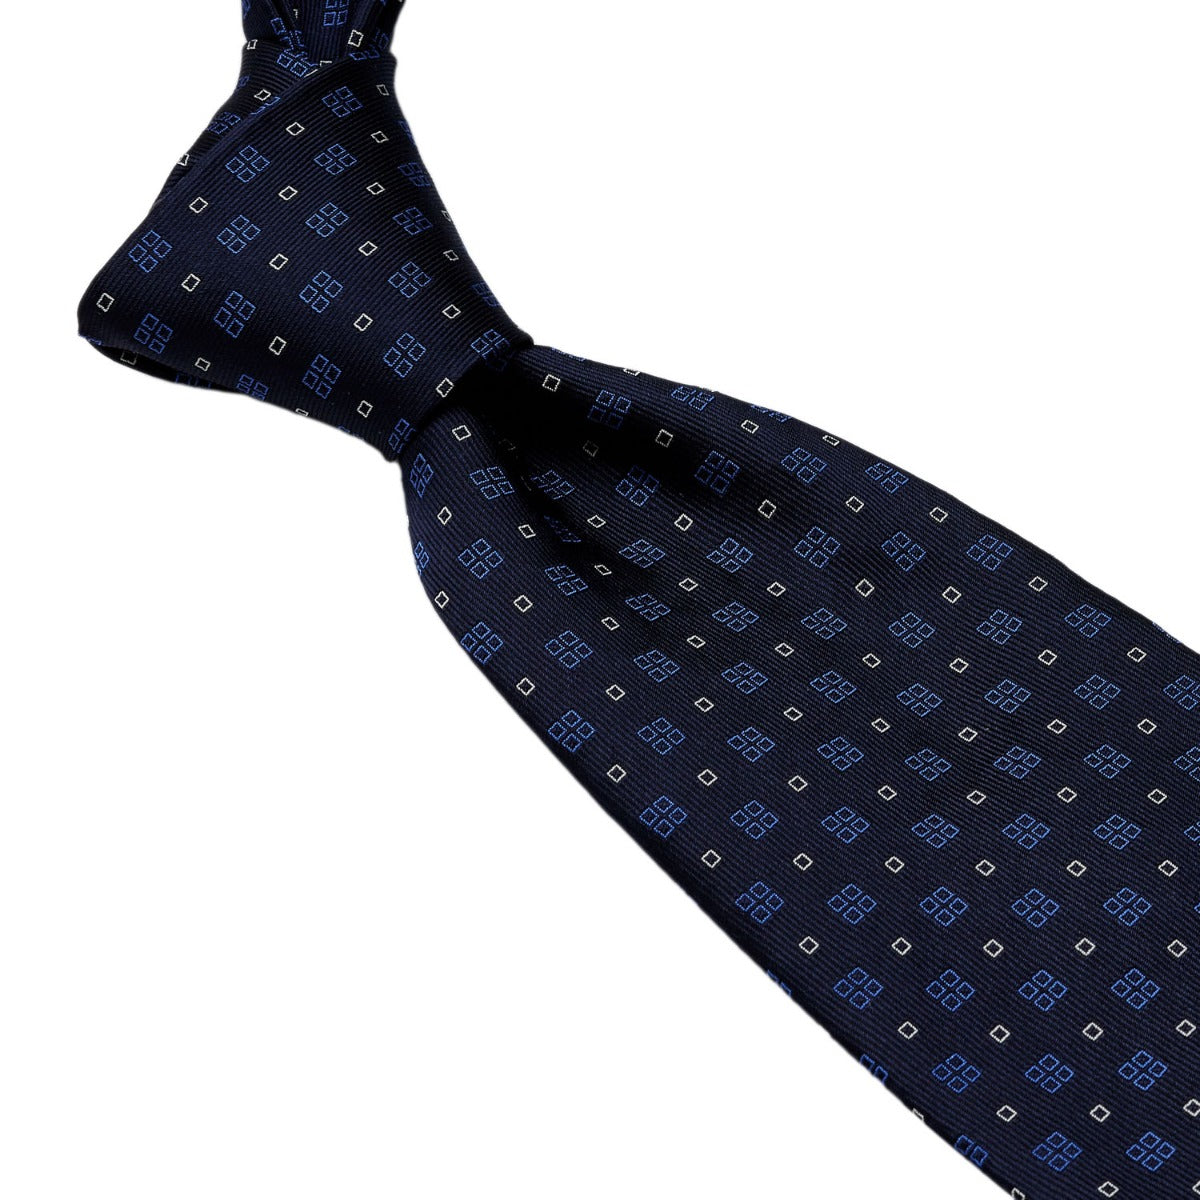 A handmade Sovereign Grade Navy Alternating Square Jacquard Tie from KirbyAllison.com with a blue and white pattern, from the United Kingdom.